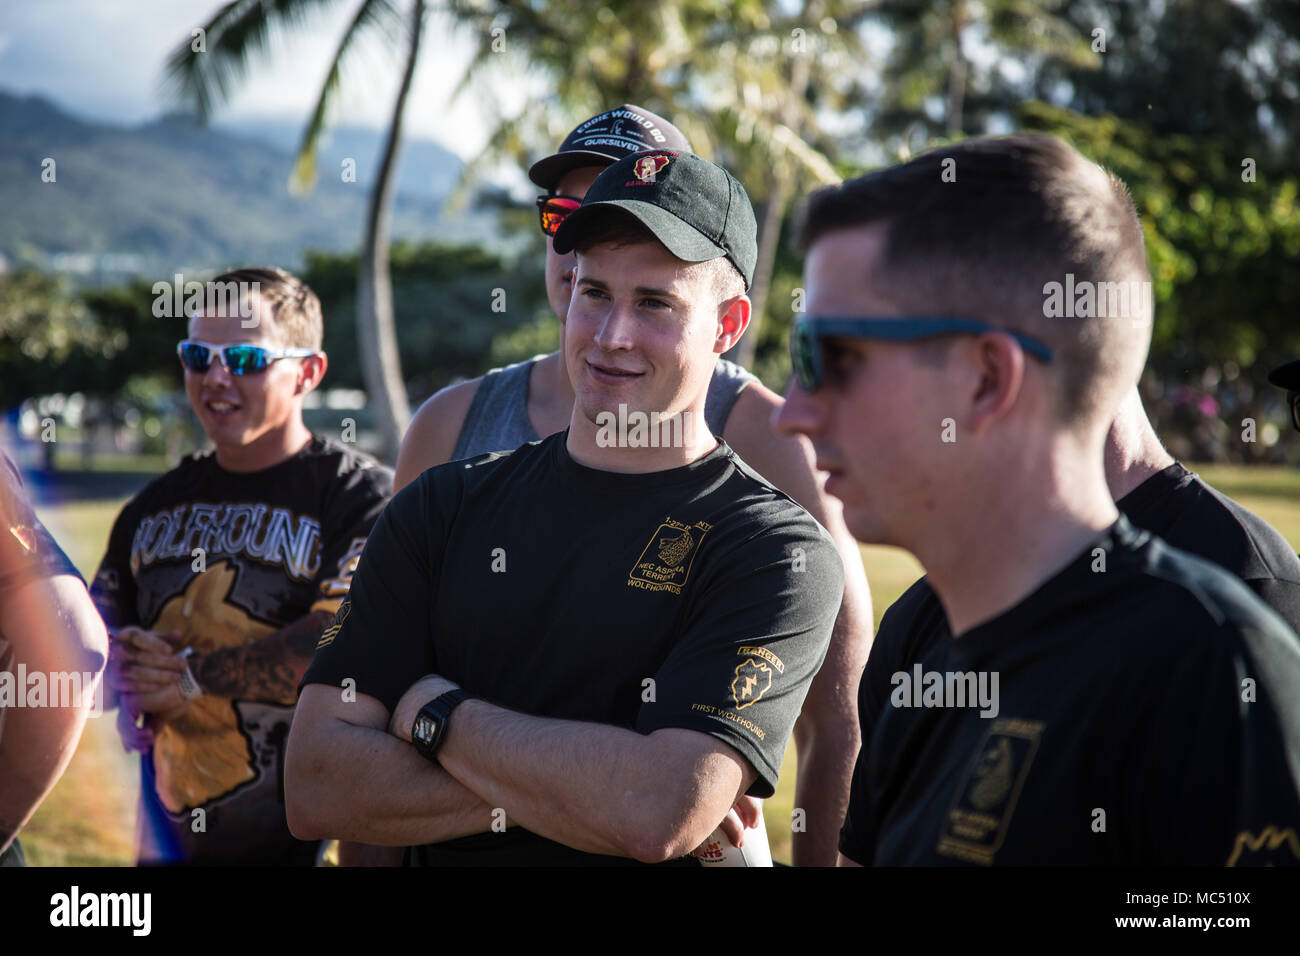 U.S. Army 1st. Lt. Nicholas Keeley, assigned to 1st Battalion, 27th Infantry Regiment, 2nd Infantry Brigade Combat Team, 25th Infantry Division listens to group introductions before the start of the team-building exercise in Keehi Lagoon, Honolulu, Hi., Jan. 30, 2018. In an effort to strengthen international relationships, United States Army Pacific hosted personnel from the British Army to participate in a team building exercise facilitating outrigger canoeing. (U.S. Army photo by 1st. Lt. Ryan DeBooy) Stock Photo